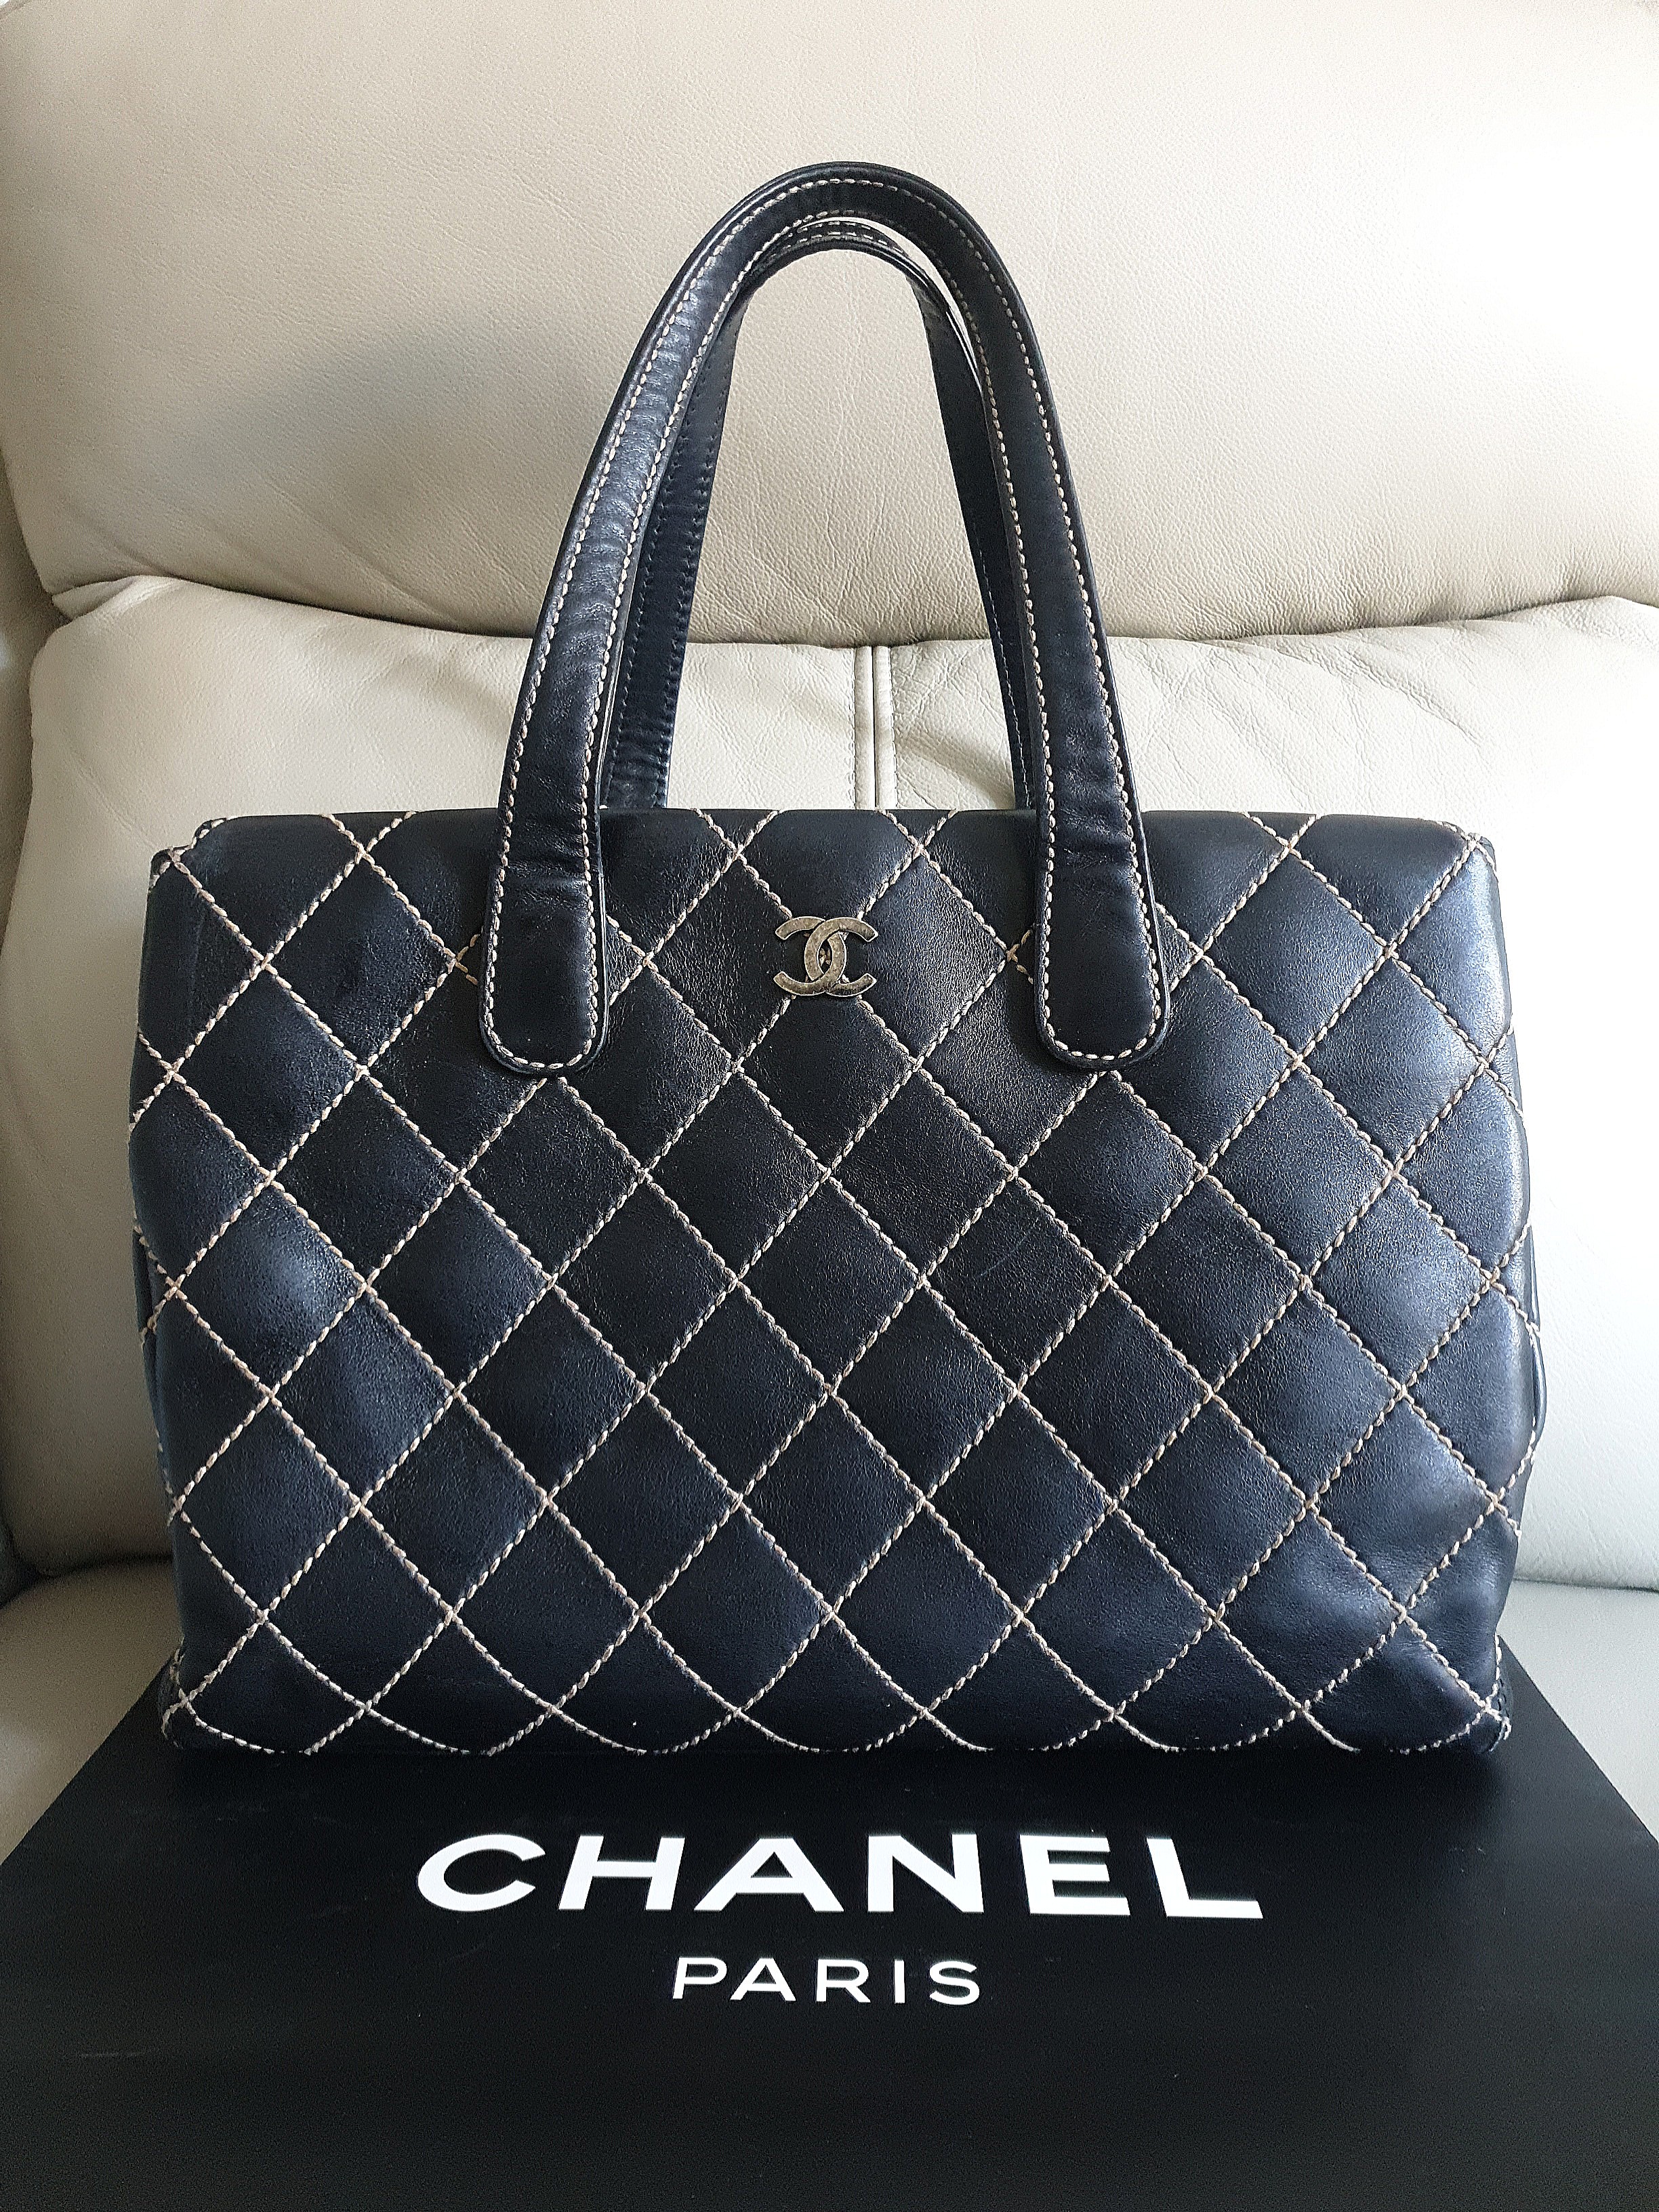 coco chanel authentic bag